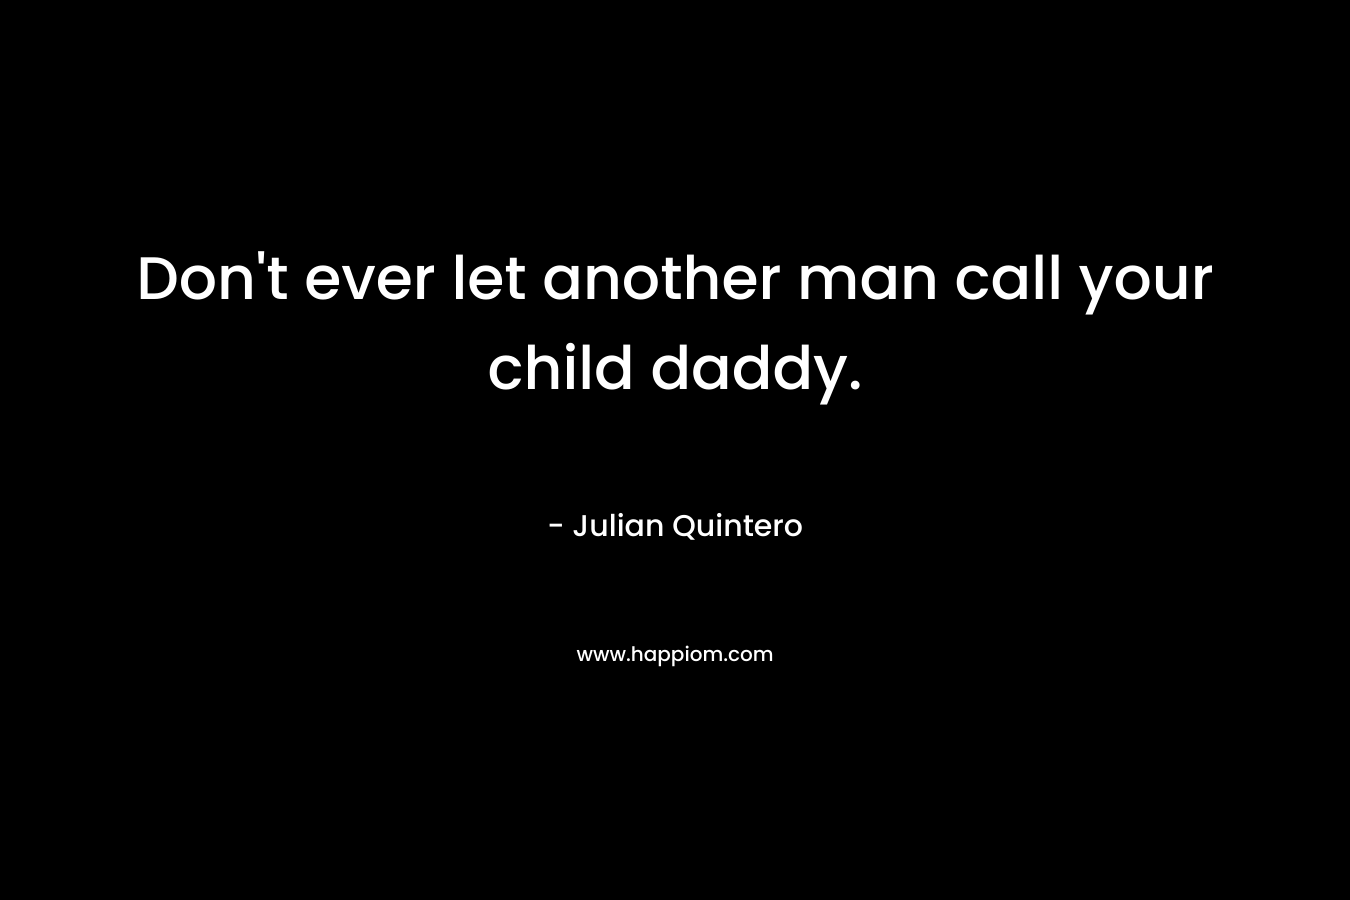 Don't ever let another man call your child daddy.